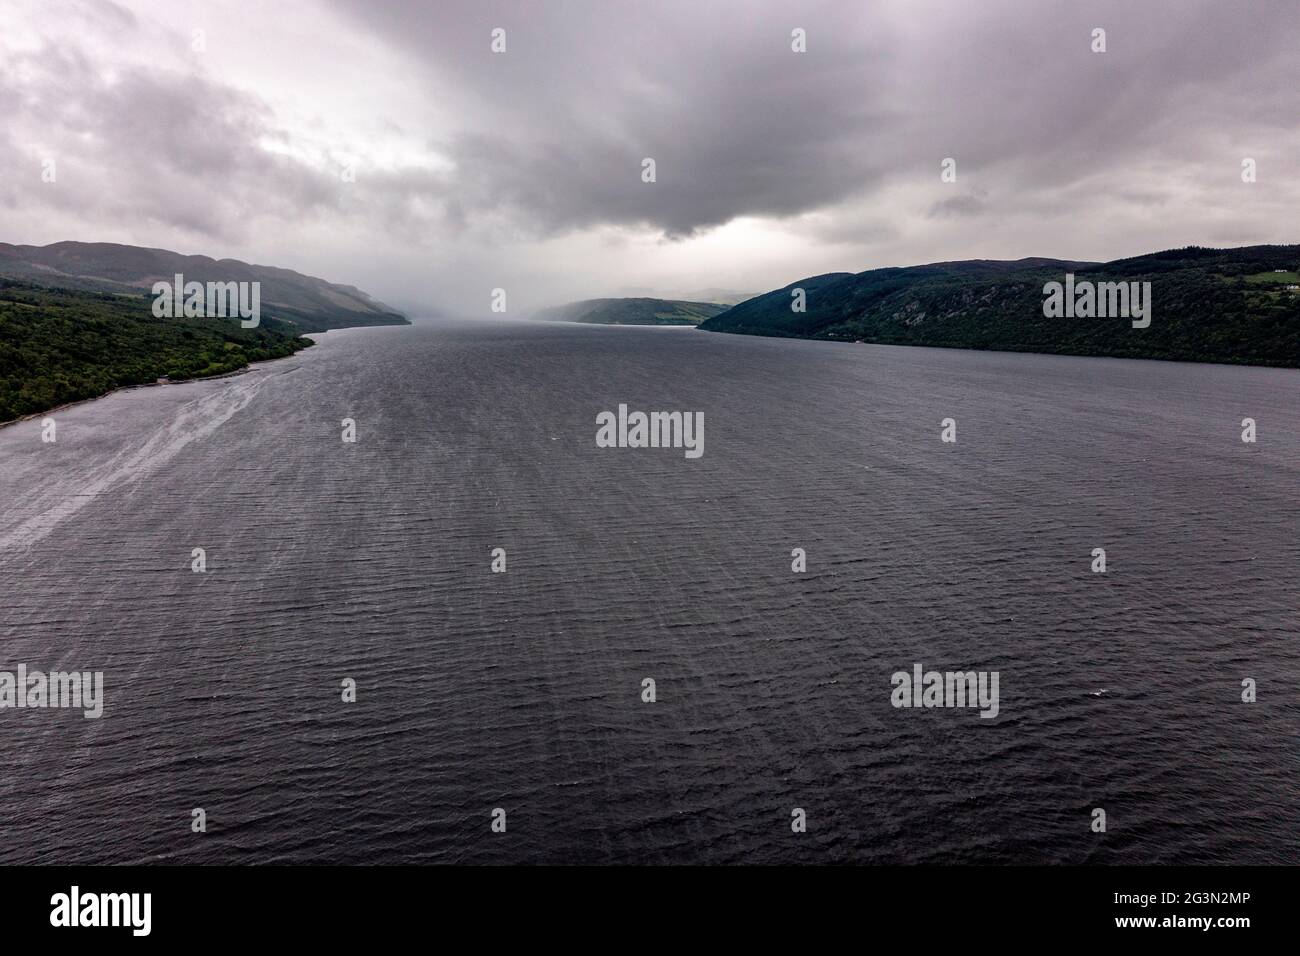 Loch Ness, Scotland, UK. 13 June 2021. Pictured: Drone aerial photography view from above of Loch Ness looking down the Great Glen towards Urquhart Castle. Loch Ness is famous for the Loch Ness Monster AKA Nessie.  Credit: Colin Fisher/CDFIMAGES.COM Stock Photo